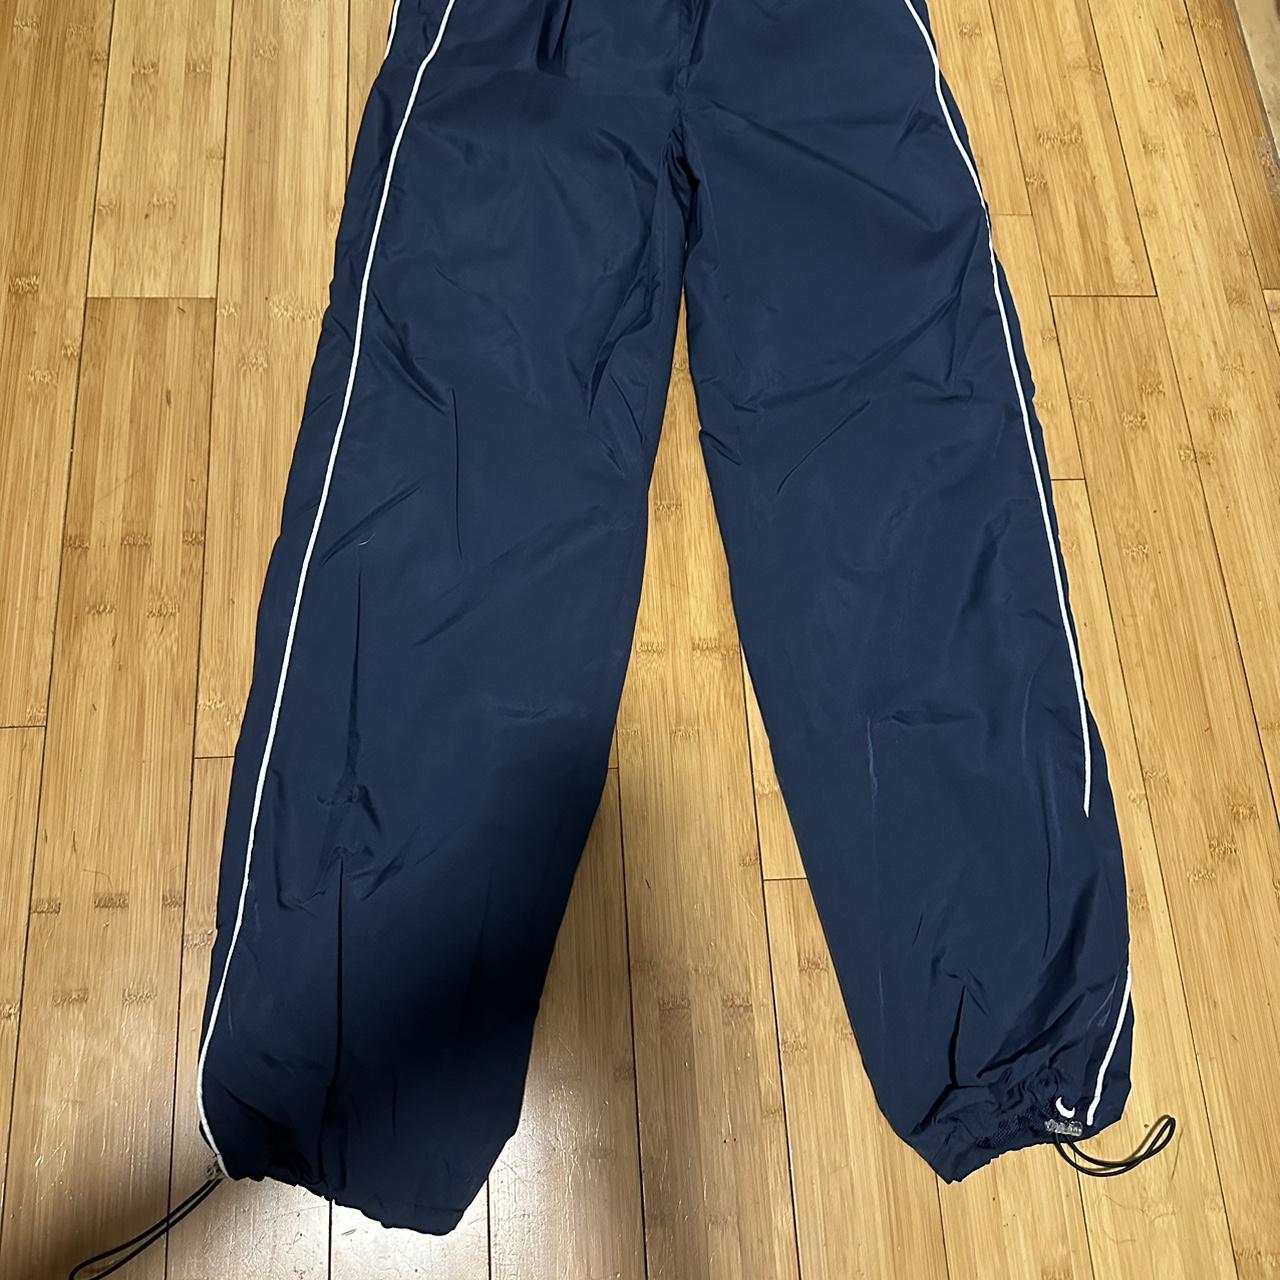 Blue Track Pants with two white lines on each side... - Depop